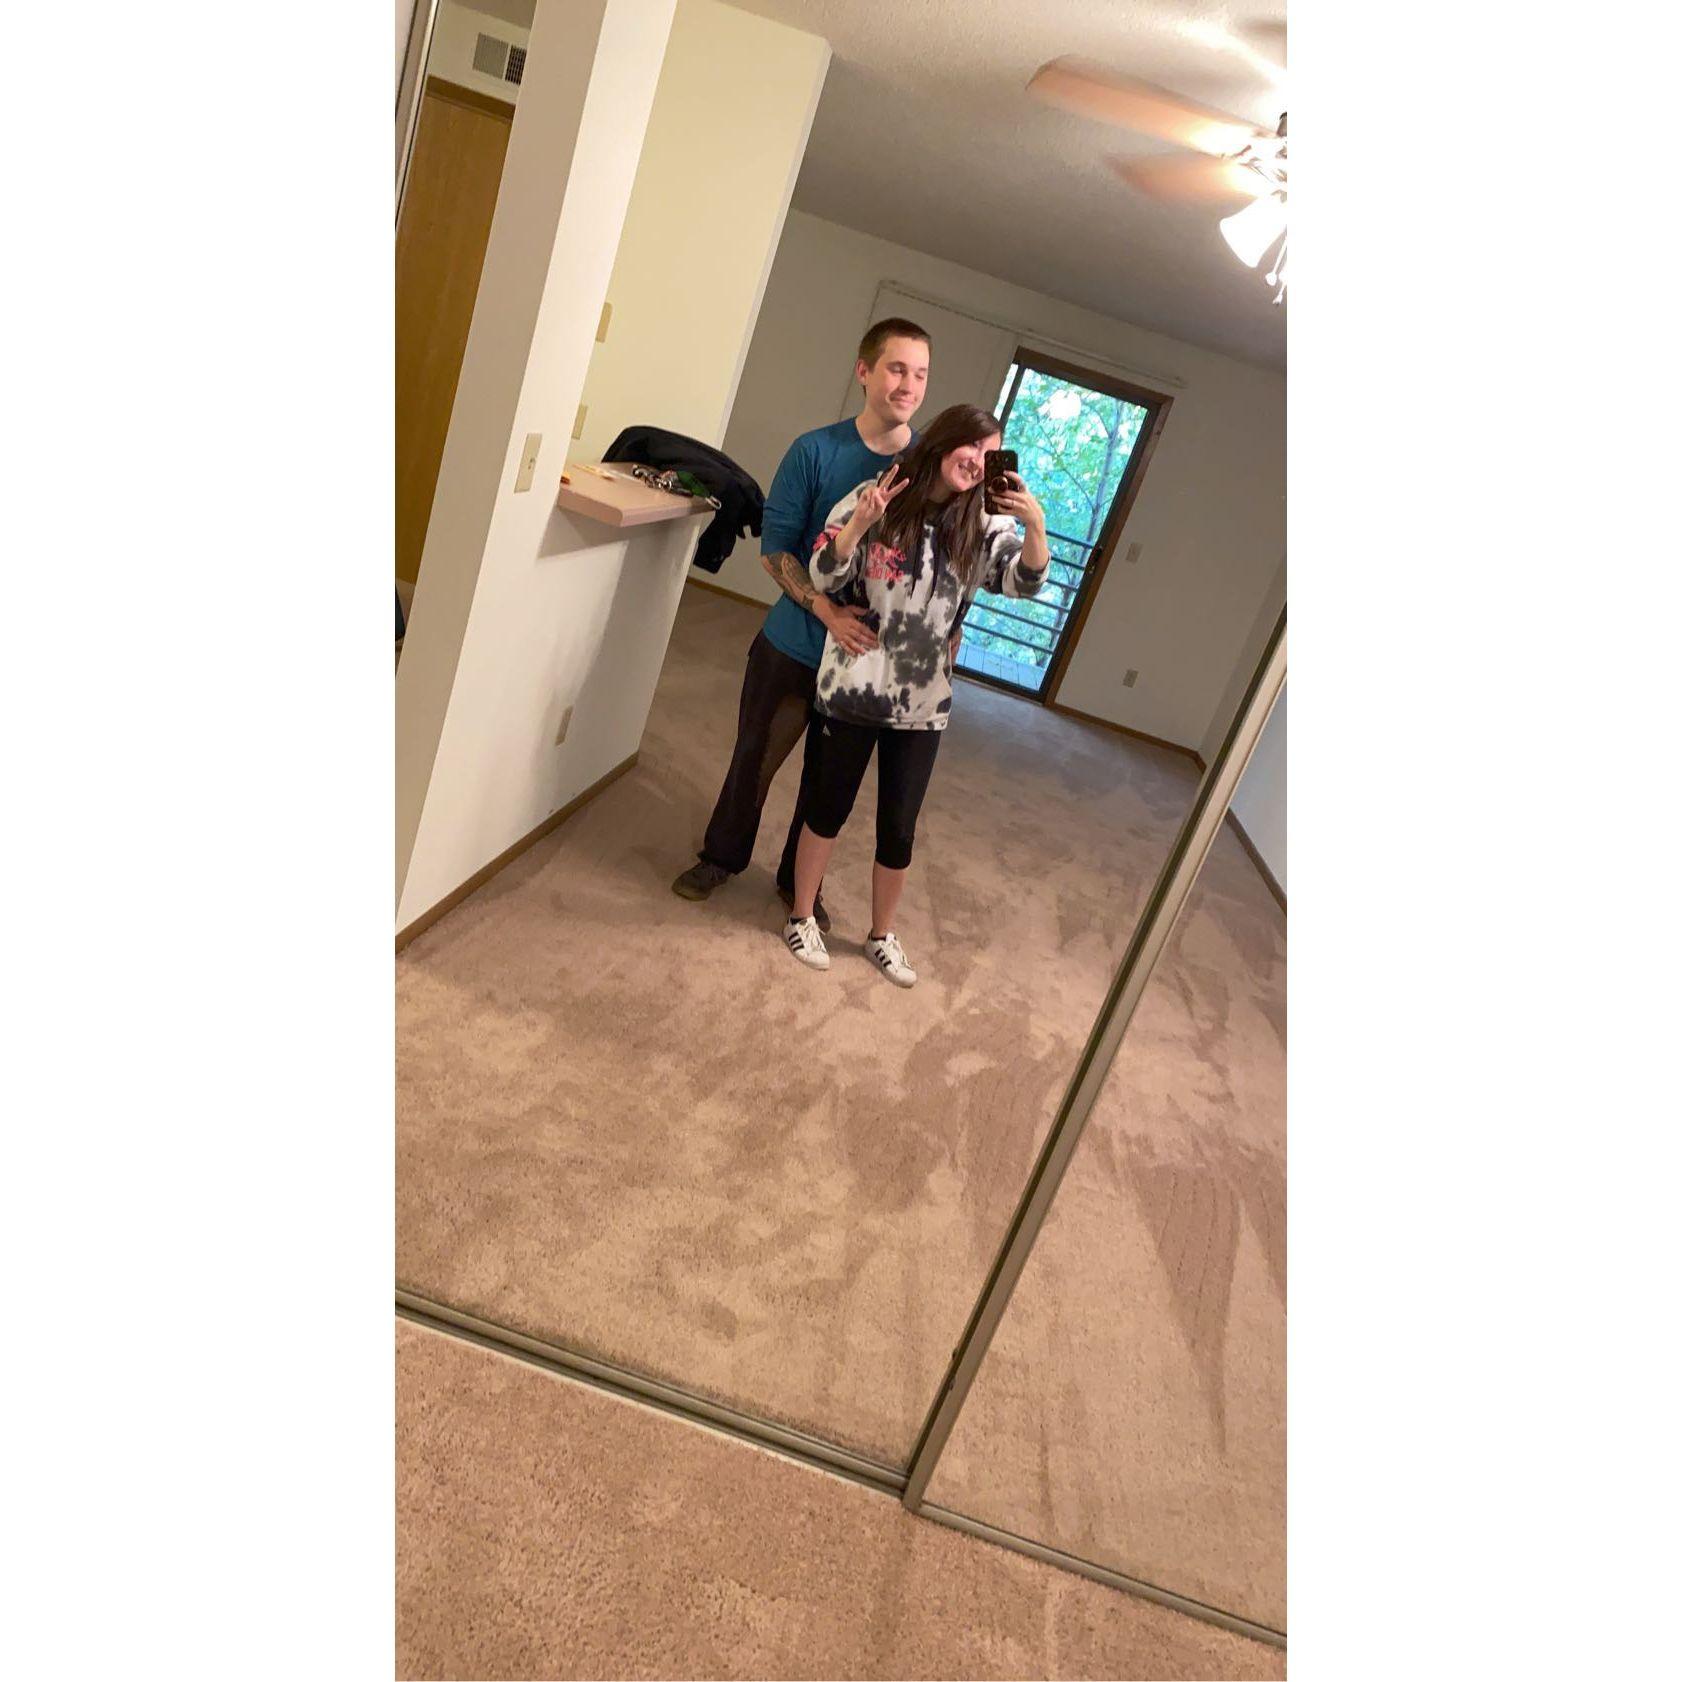 Our first photo in our first apartment together